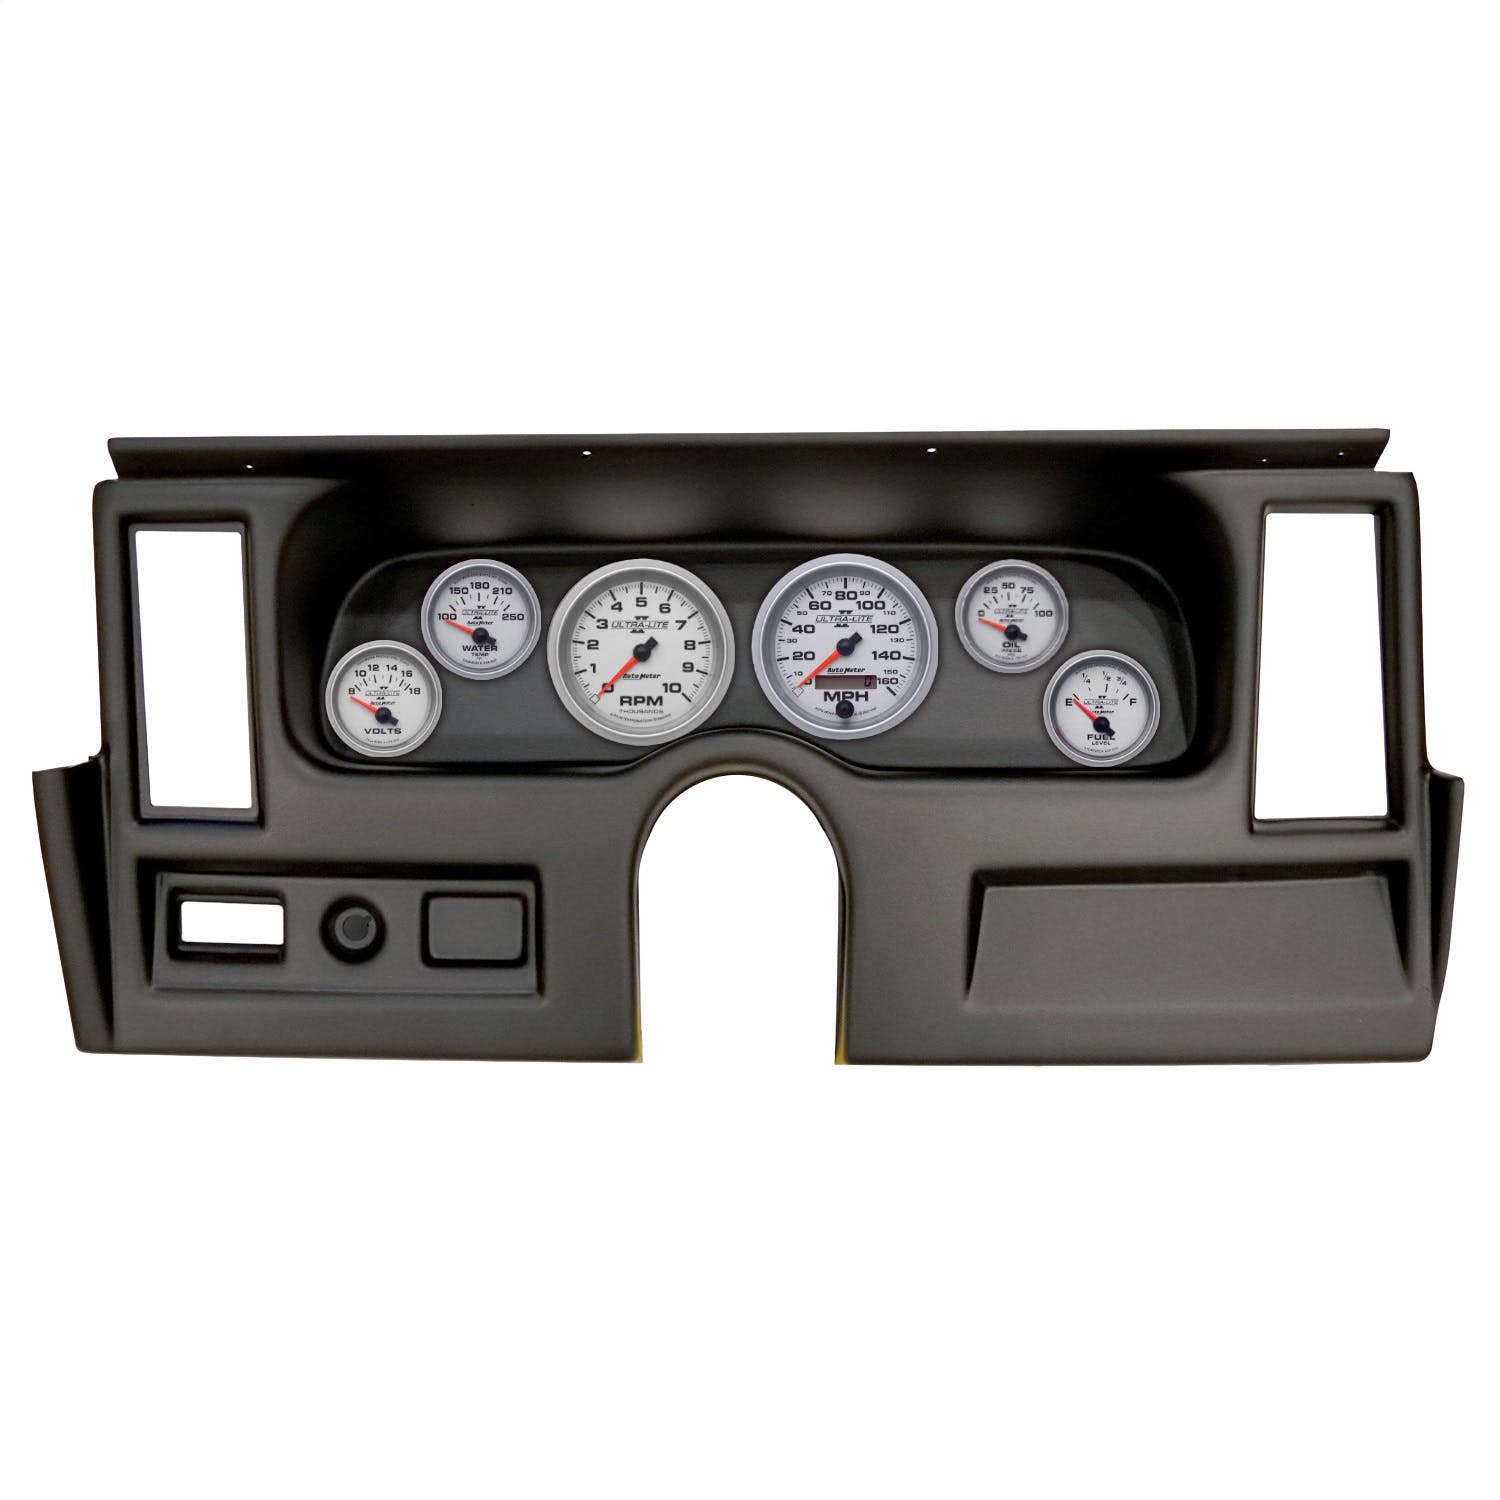 AutoMeter Products 2916-14 6 Gauge Direct-Fit Dash Kit, Chevy Nova 77-79, Ultra-Lite II